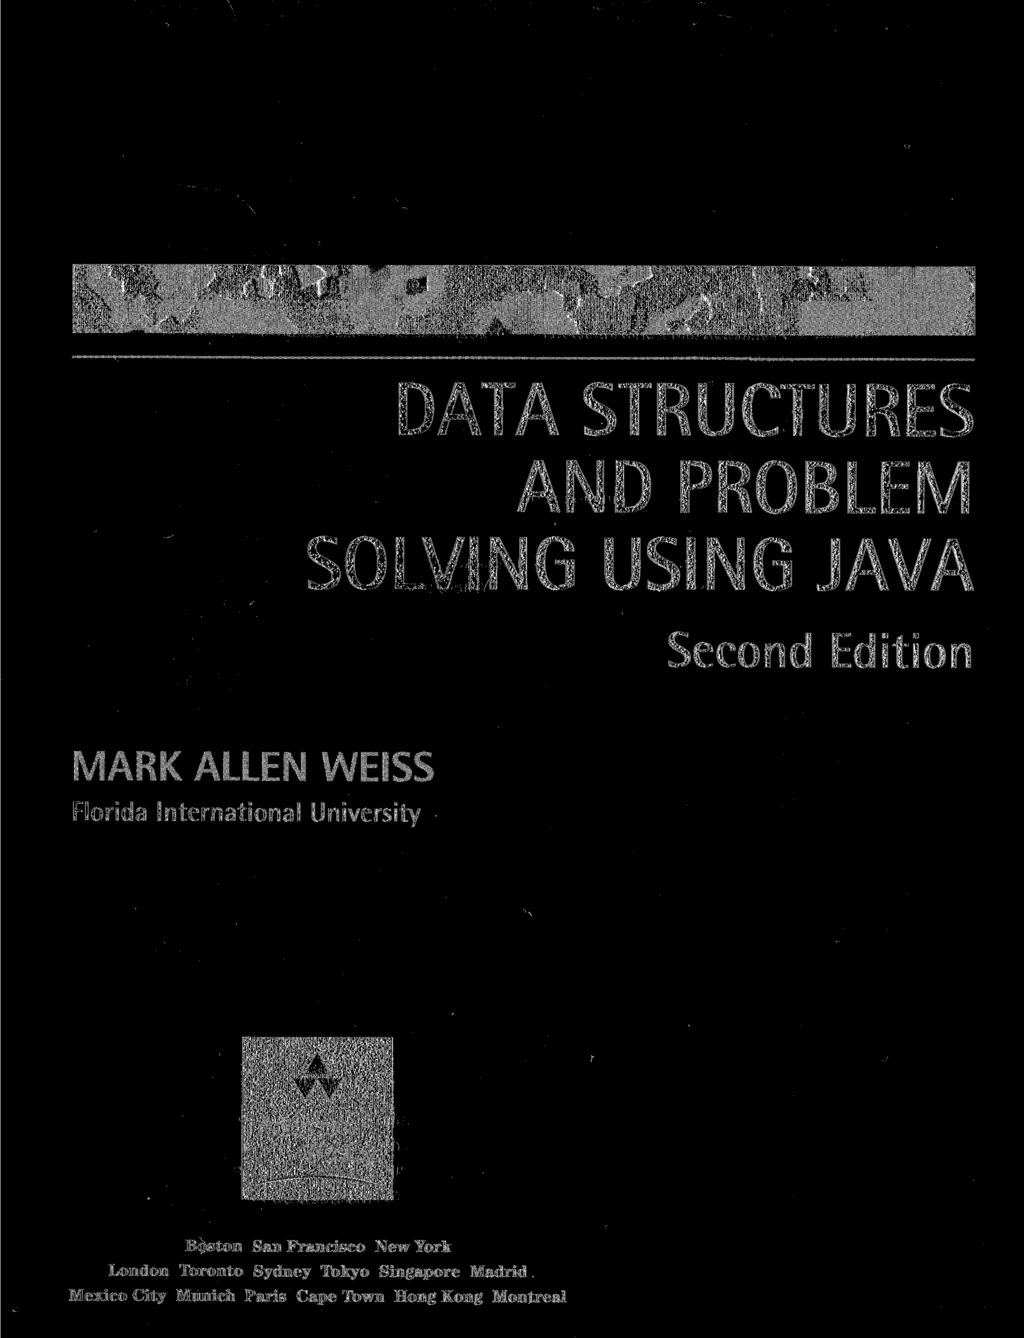 DATA STRUCTURES AND PROBLEM SOLVING USING JAVA Second Edition MARK ALLEN WEISS Florida International University Addison Wesley